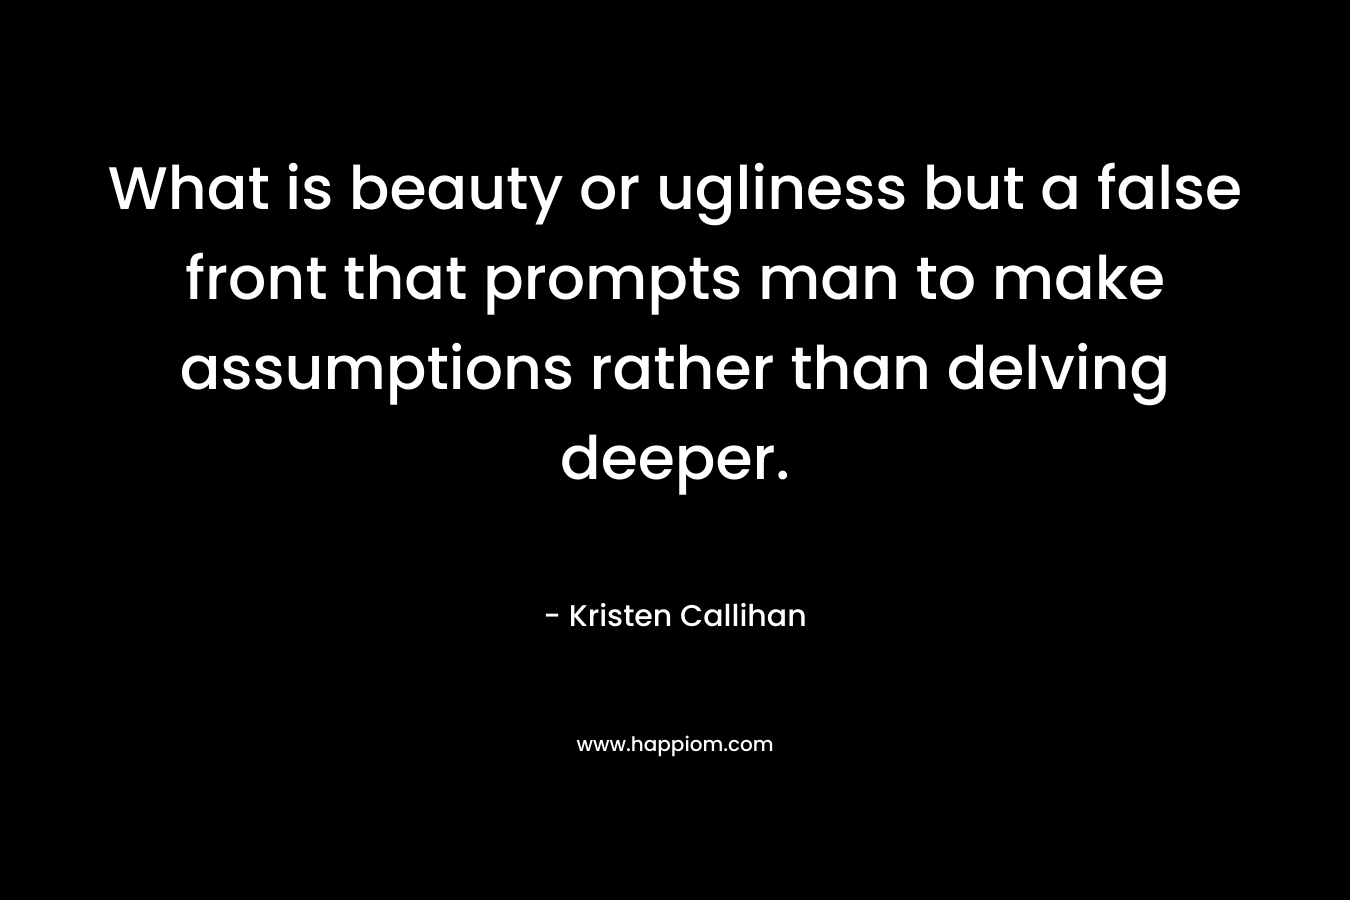 What is beauty or ugliness but a false front that prompts man to make assumptions rather than delving deeper. – Kristen Callihan